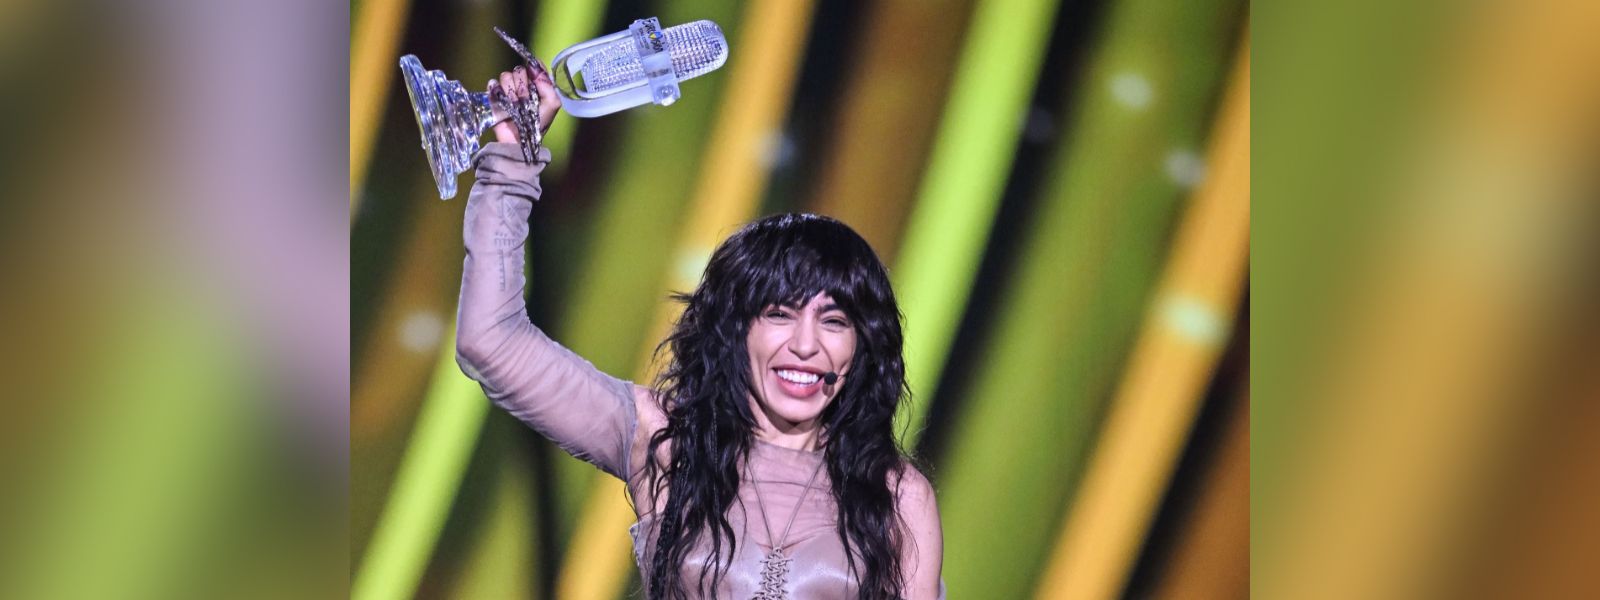 Sweden's Loreen wins Eurovision for 2nd time